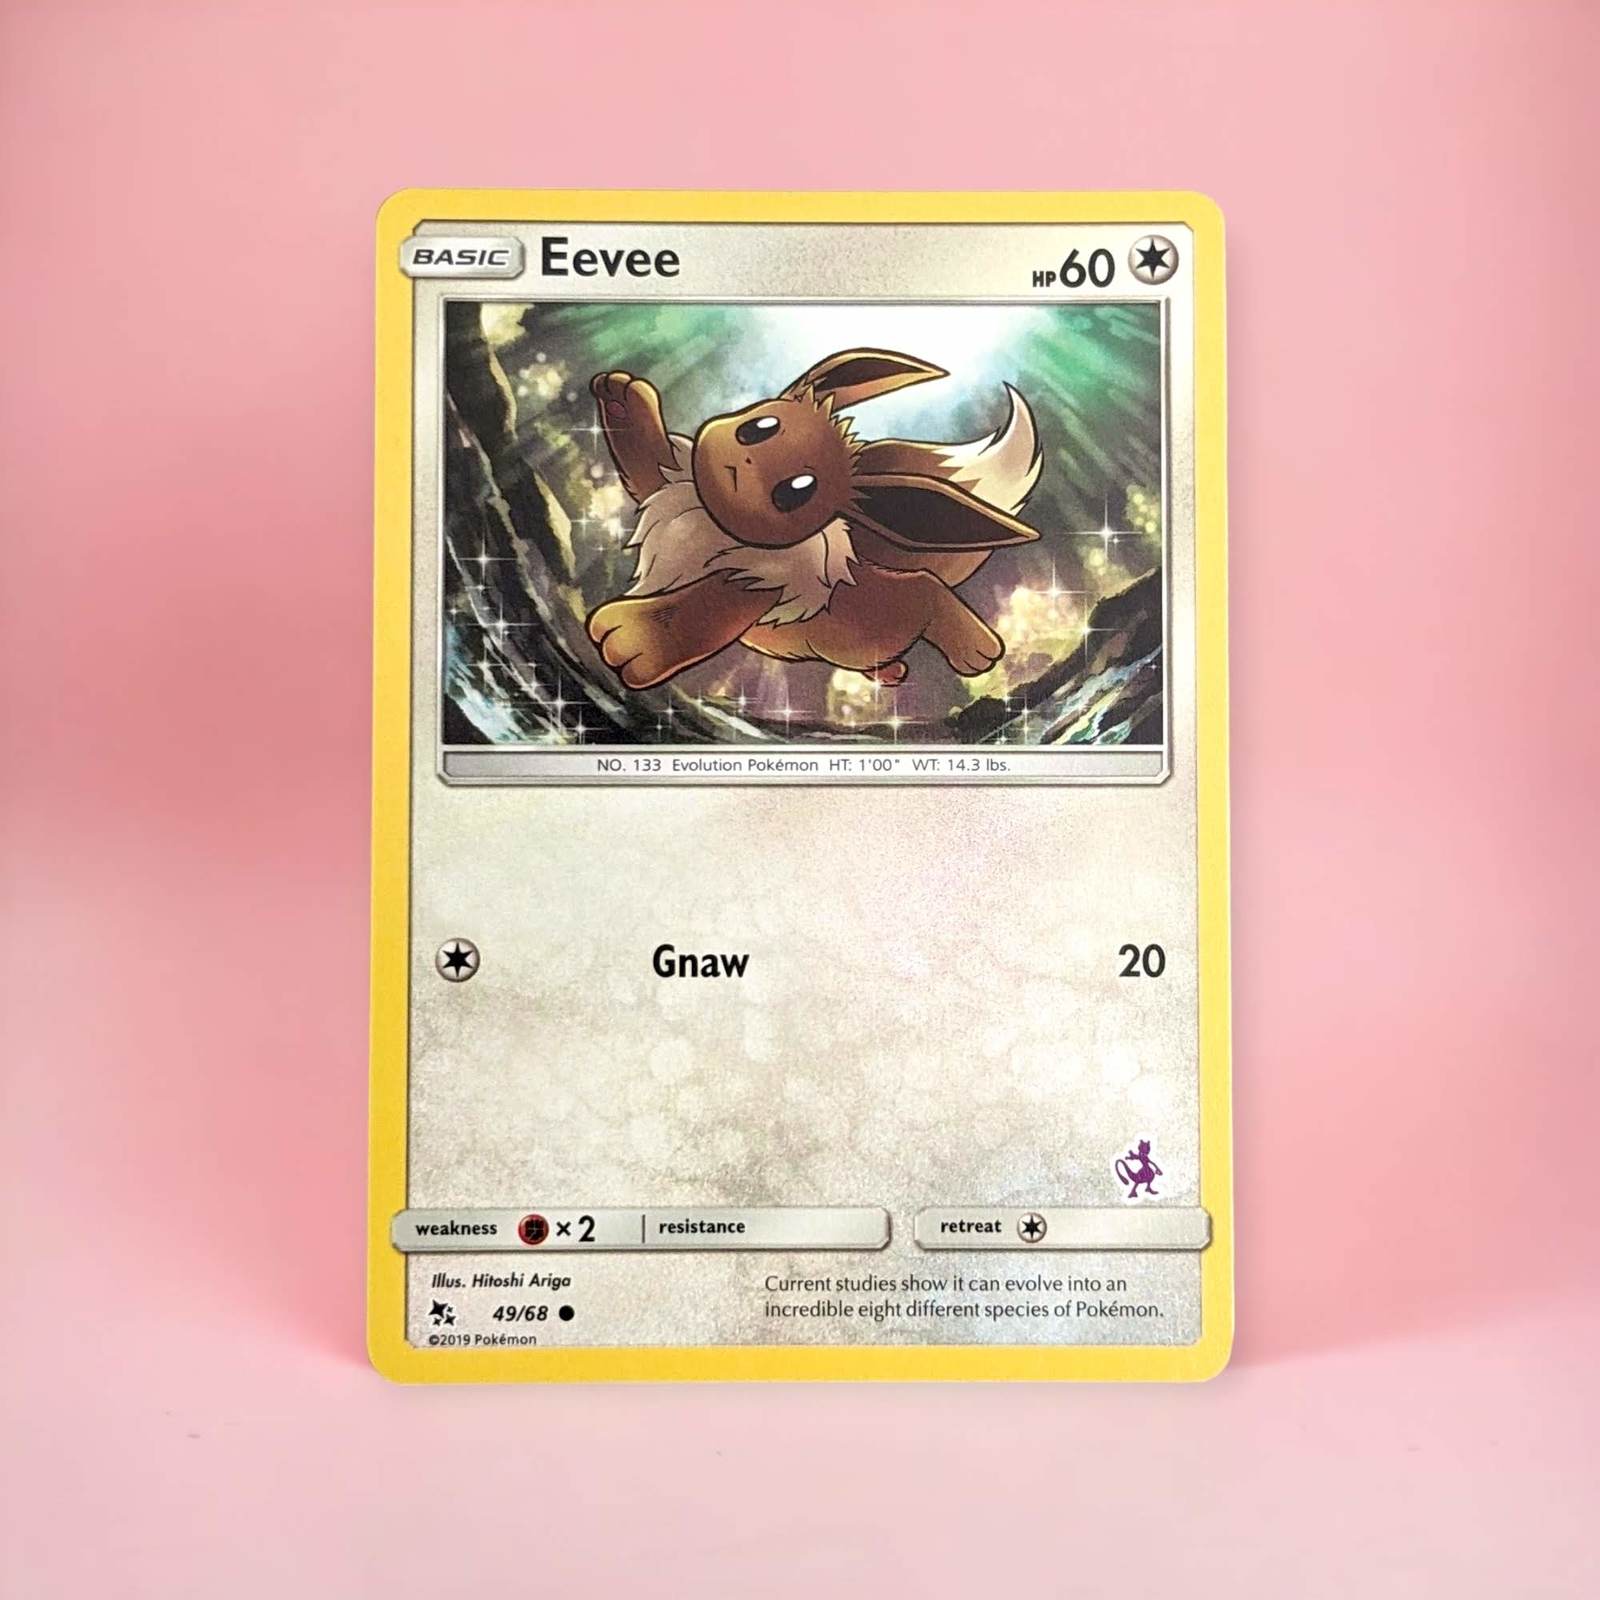 Primary image for Hidden Fates Pokemon Card: Eevee 49/68, Mewtwo Stamp